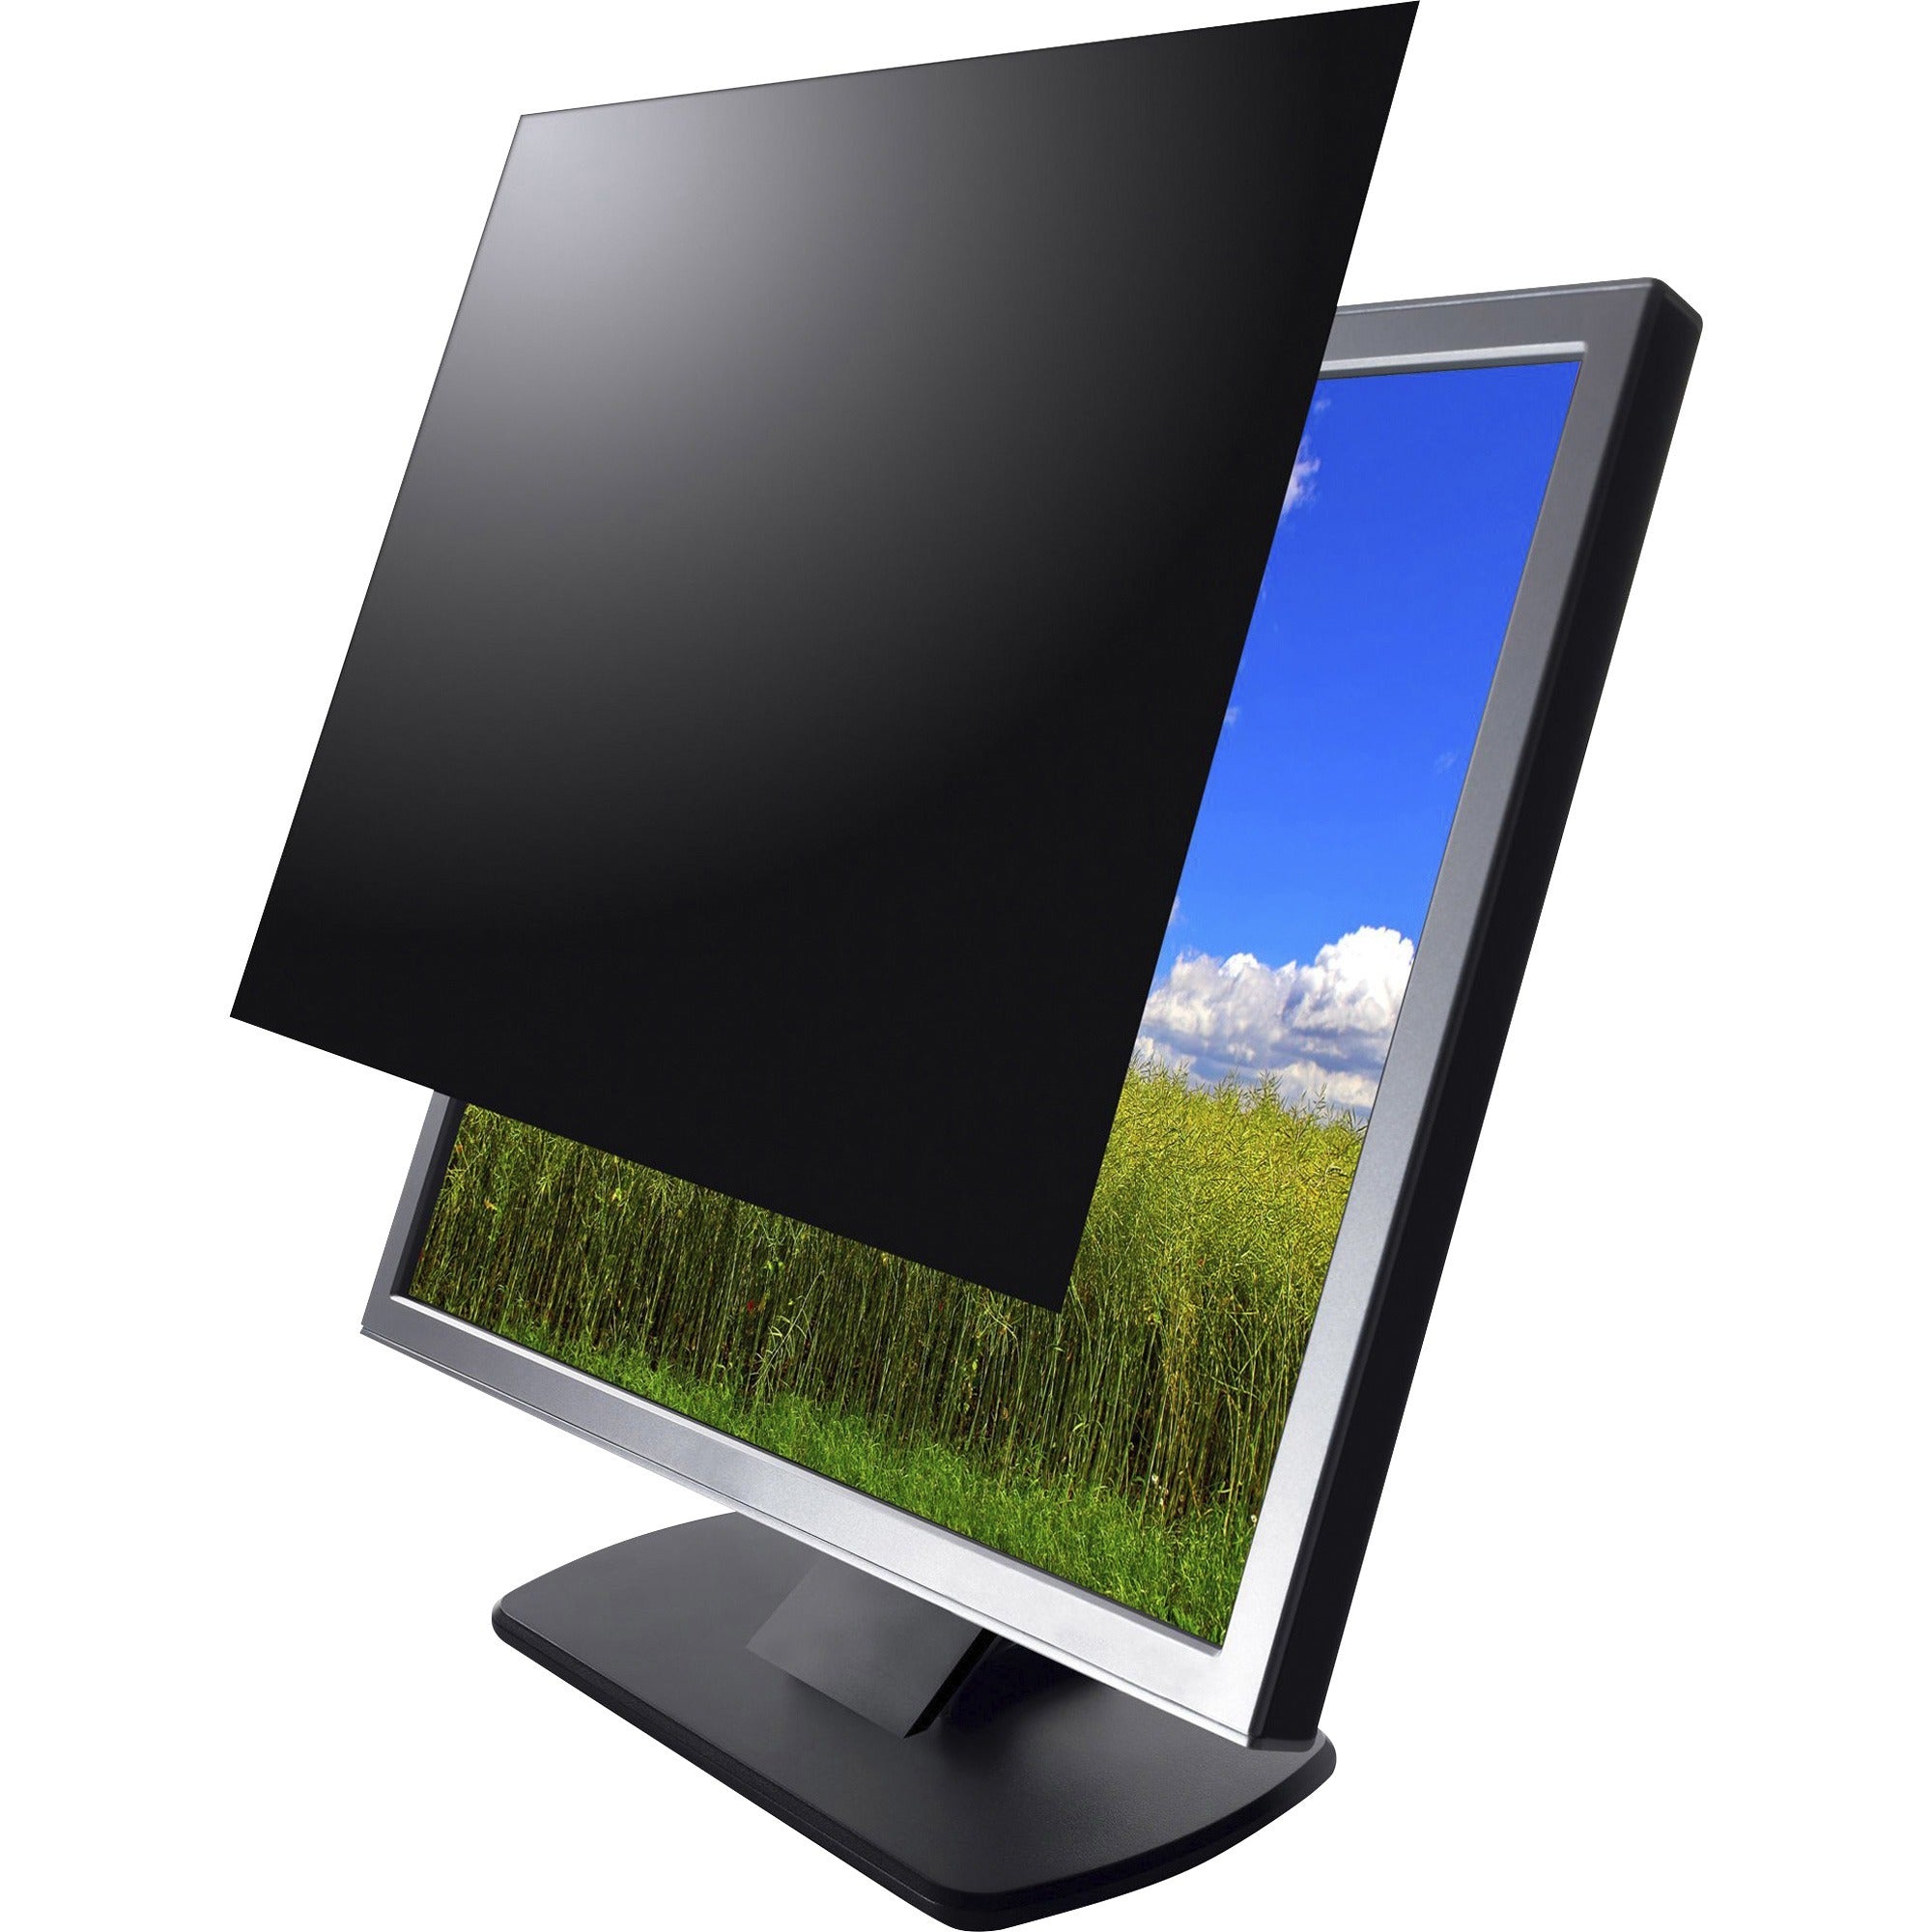 kantek-widescreen-privacy-filter-black-for-32-widescreen-lcd-notebook-monitor-damage-resistant-anti-glare-1-pack_ktksvl32w - 1